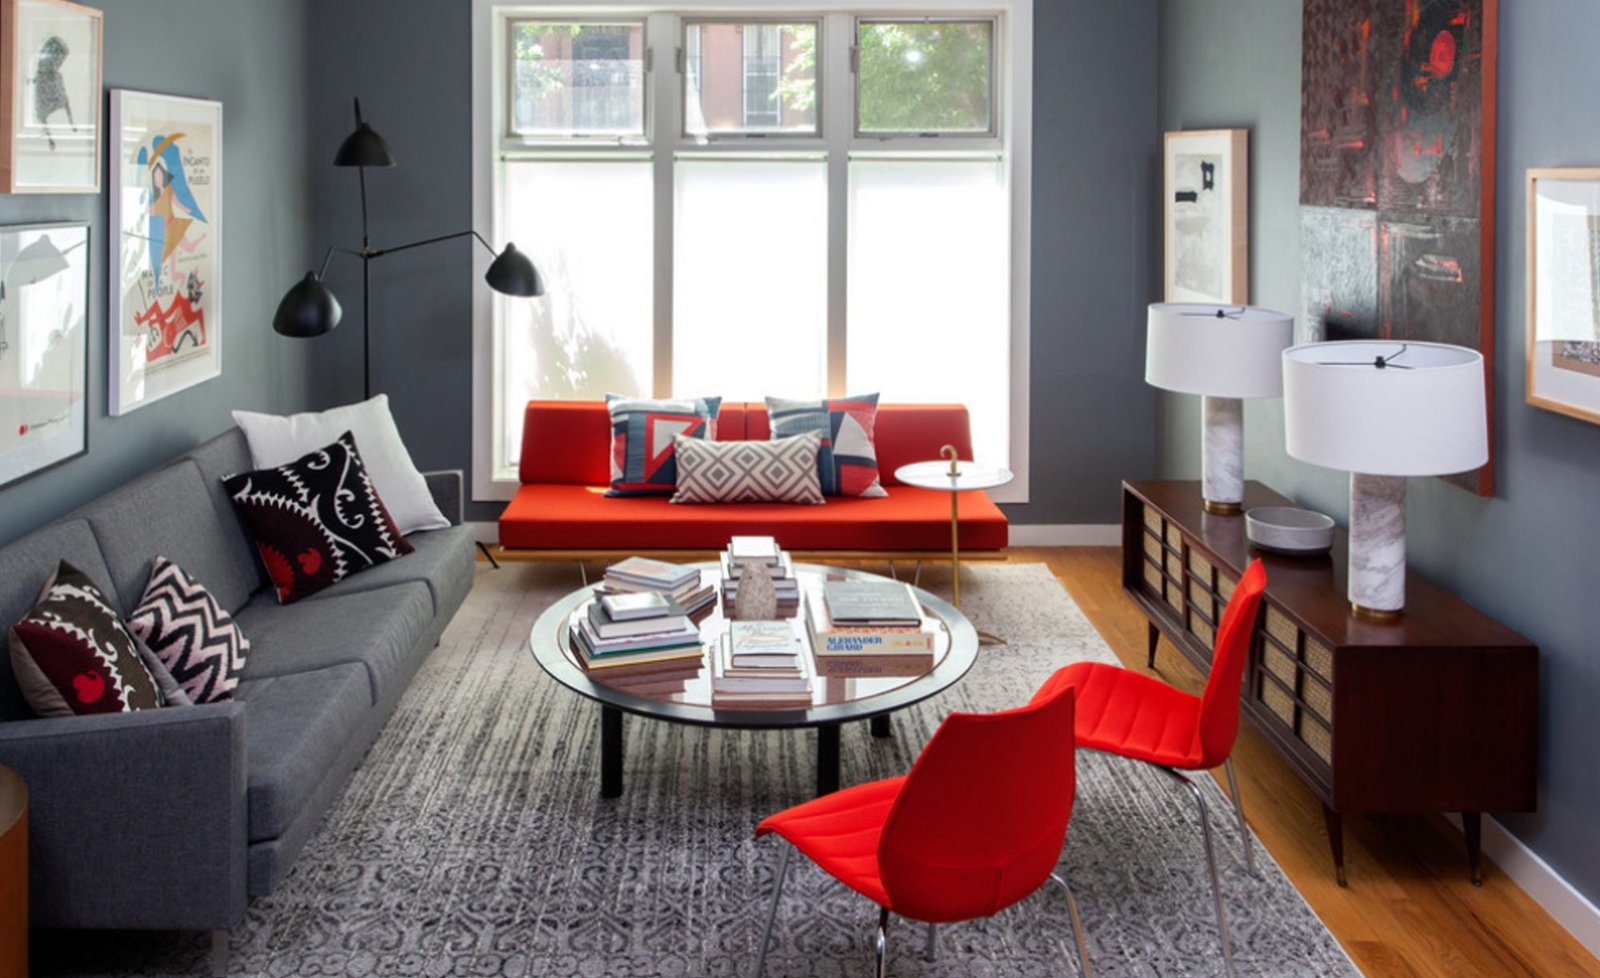 How to Find the Right Paint Colors that Work Best in Your Home